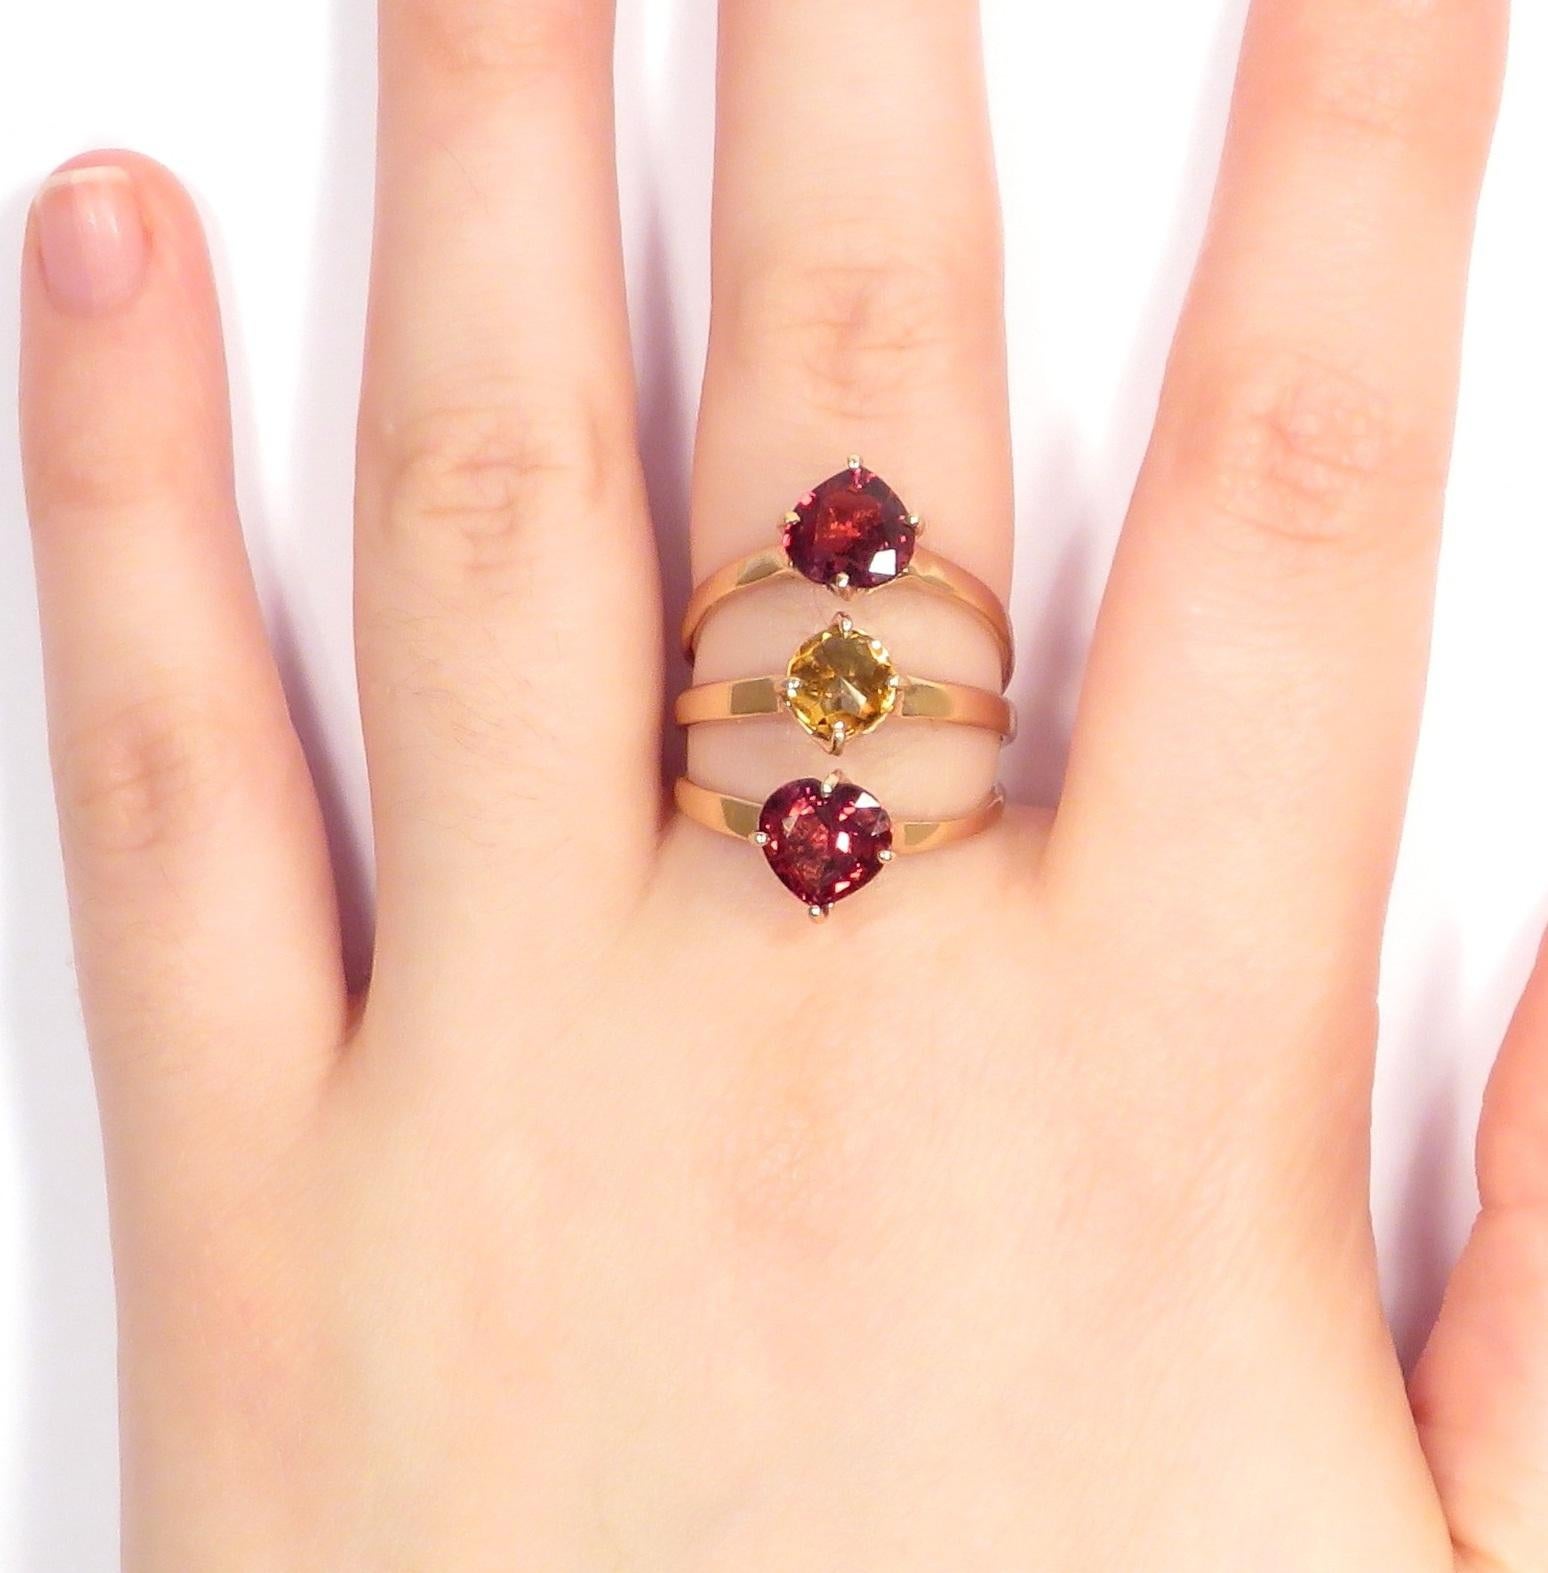 Three rings merge into one for an outstanding ring in 9 karat rose gold with 2 natural heart cut garnets and 1 rose cut yellow citrine. US finger size is 7, French size 55, Italian size 15, it can be resized to the customer's size before shipment.